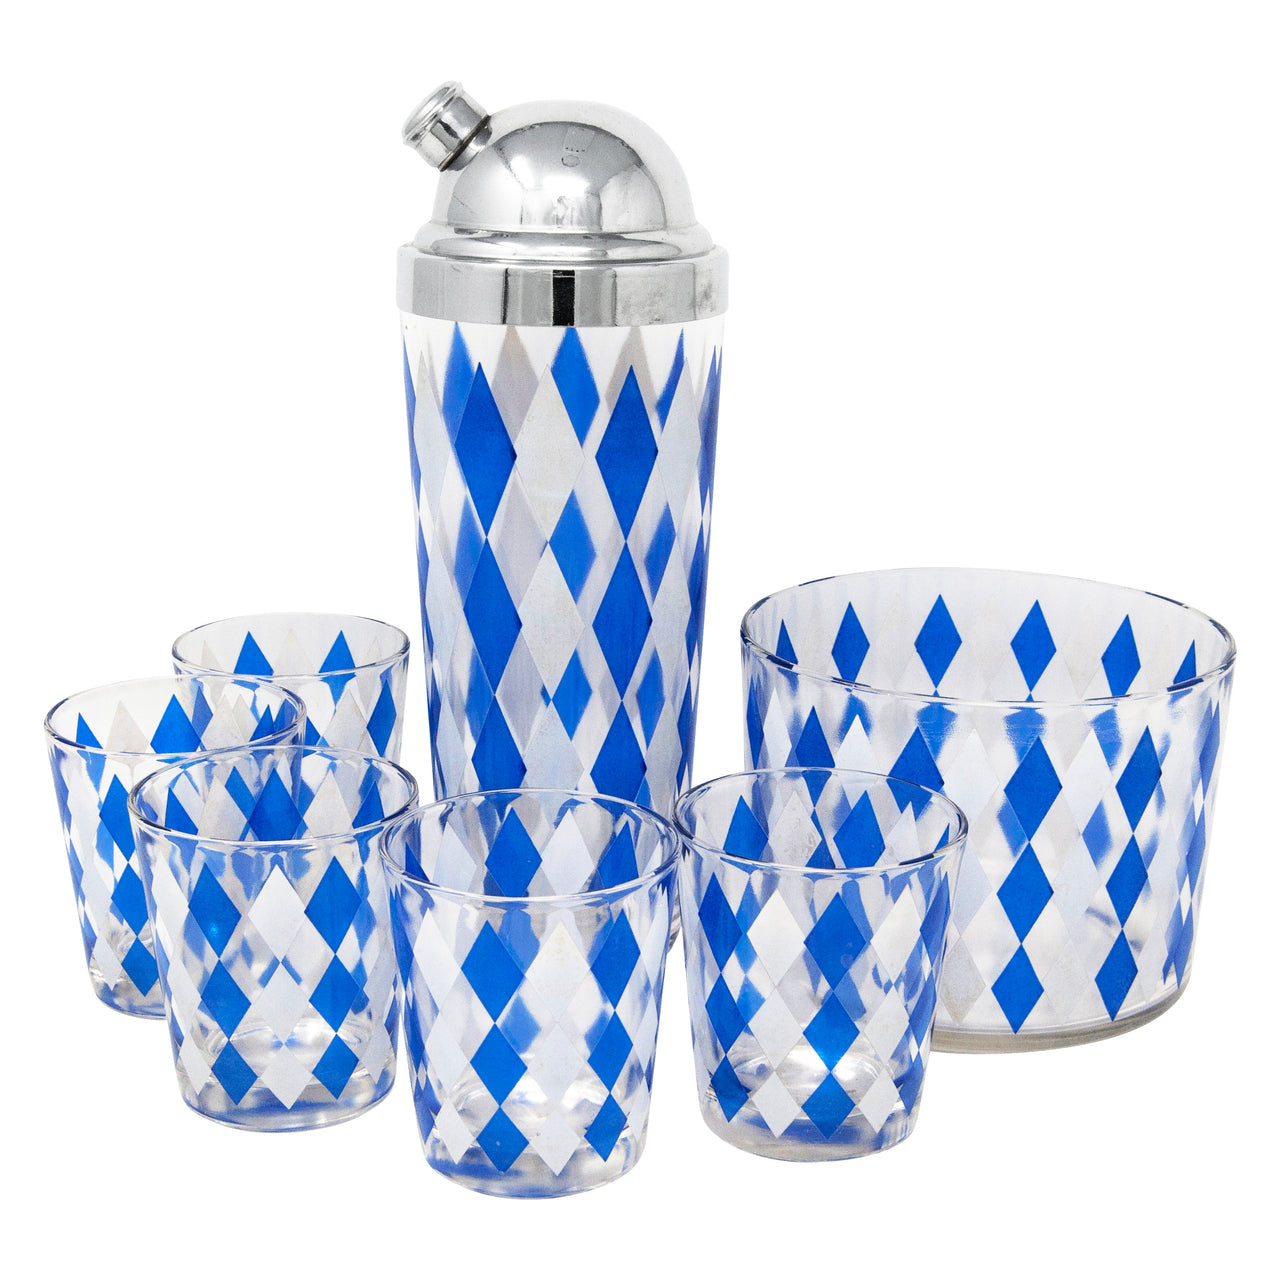 COCKTAIL SET - MARTINI GLASSES, ICE BUCKET, SHAKER AND MORE